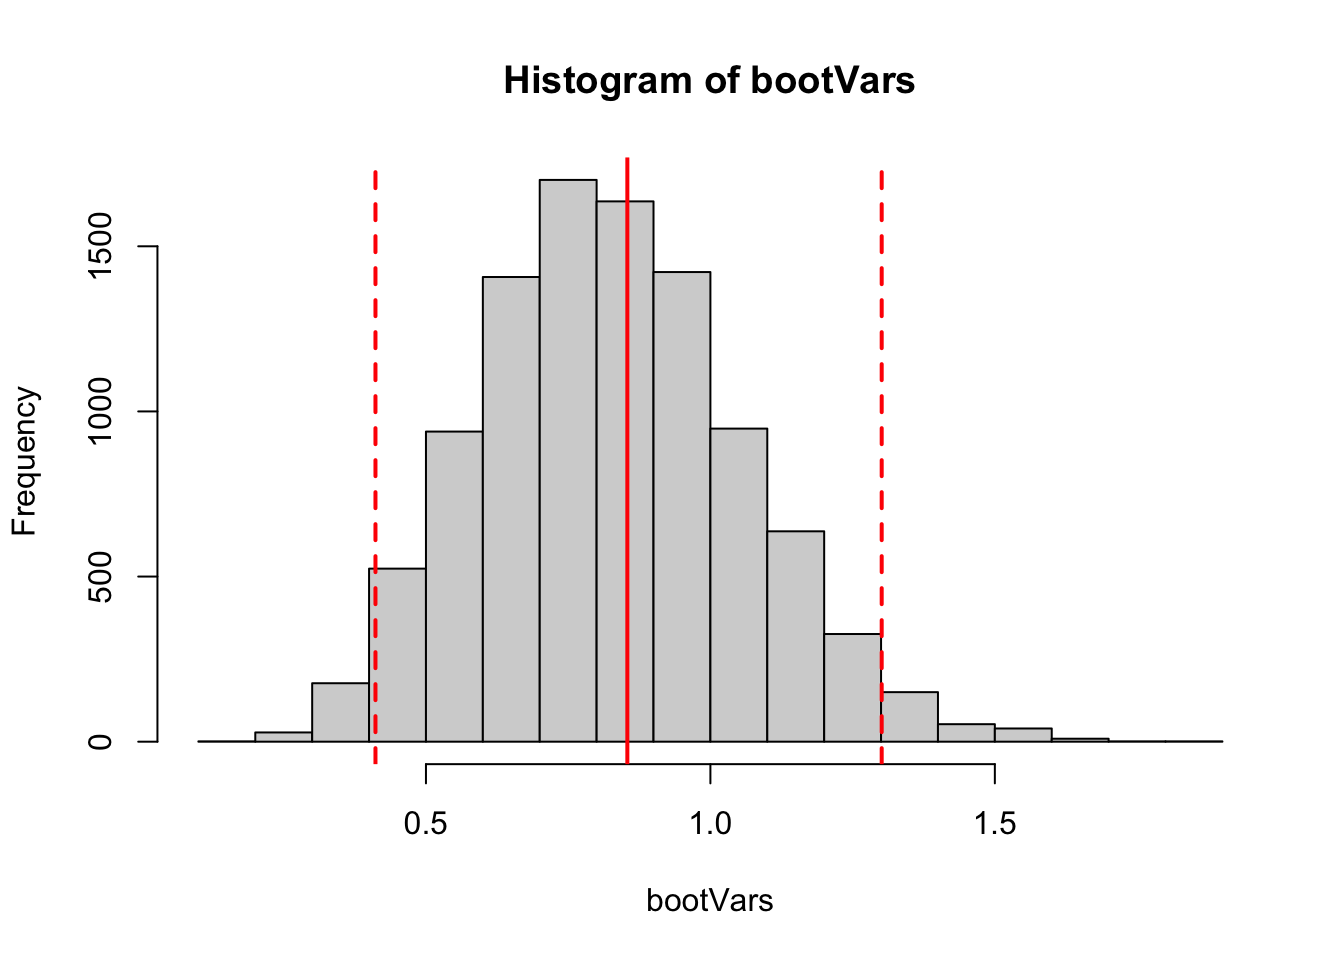 A histogram of bootstrapped estimates of the variance. The red solid line shows the sample variance of the observed data, and the dashed lines indicate 2.5th and 97.5th percentiles from the bootstrapped sample of estimates. Although the distribution of bootstrapped estimates is skewed, these percentiles are roughly the same distance from the sample variance.